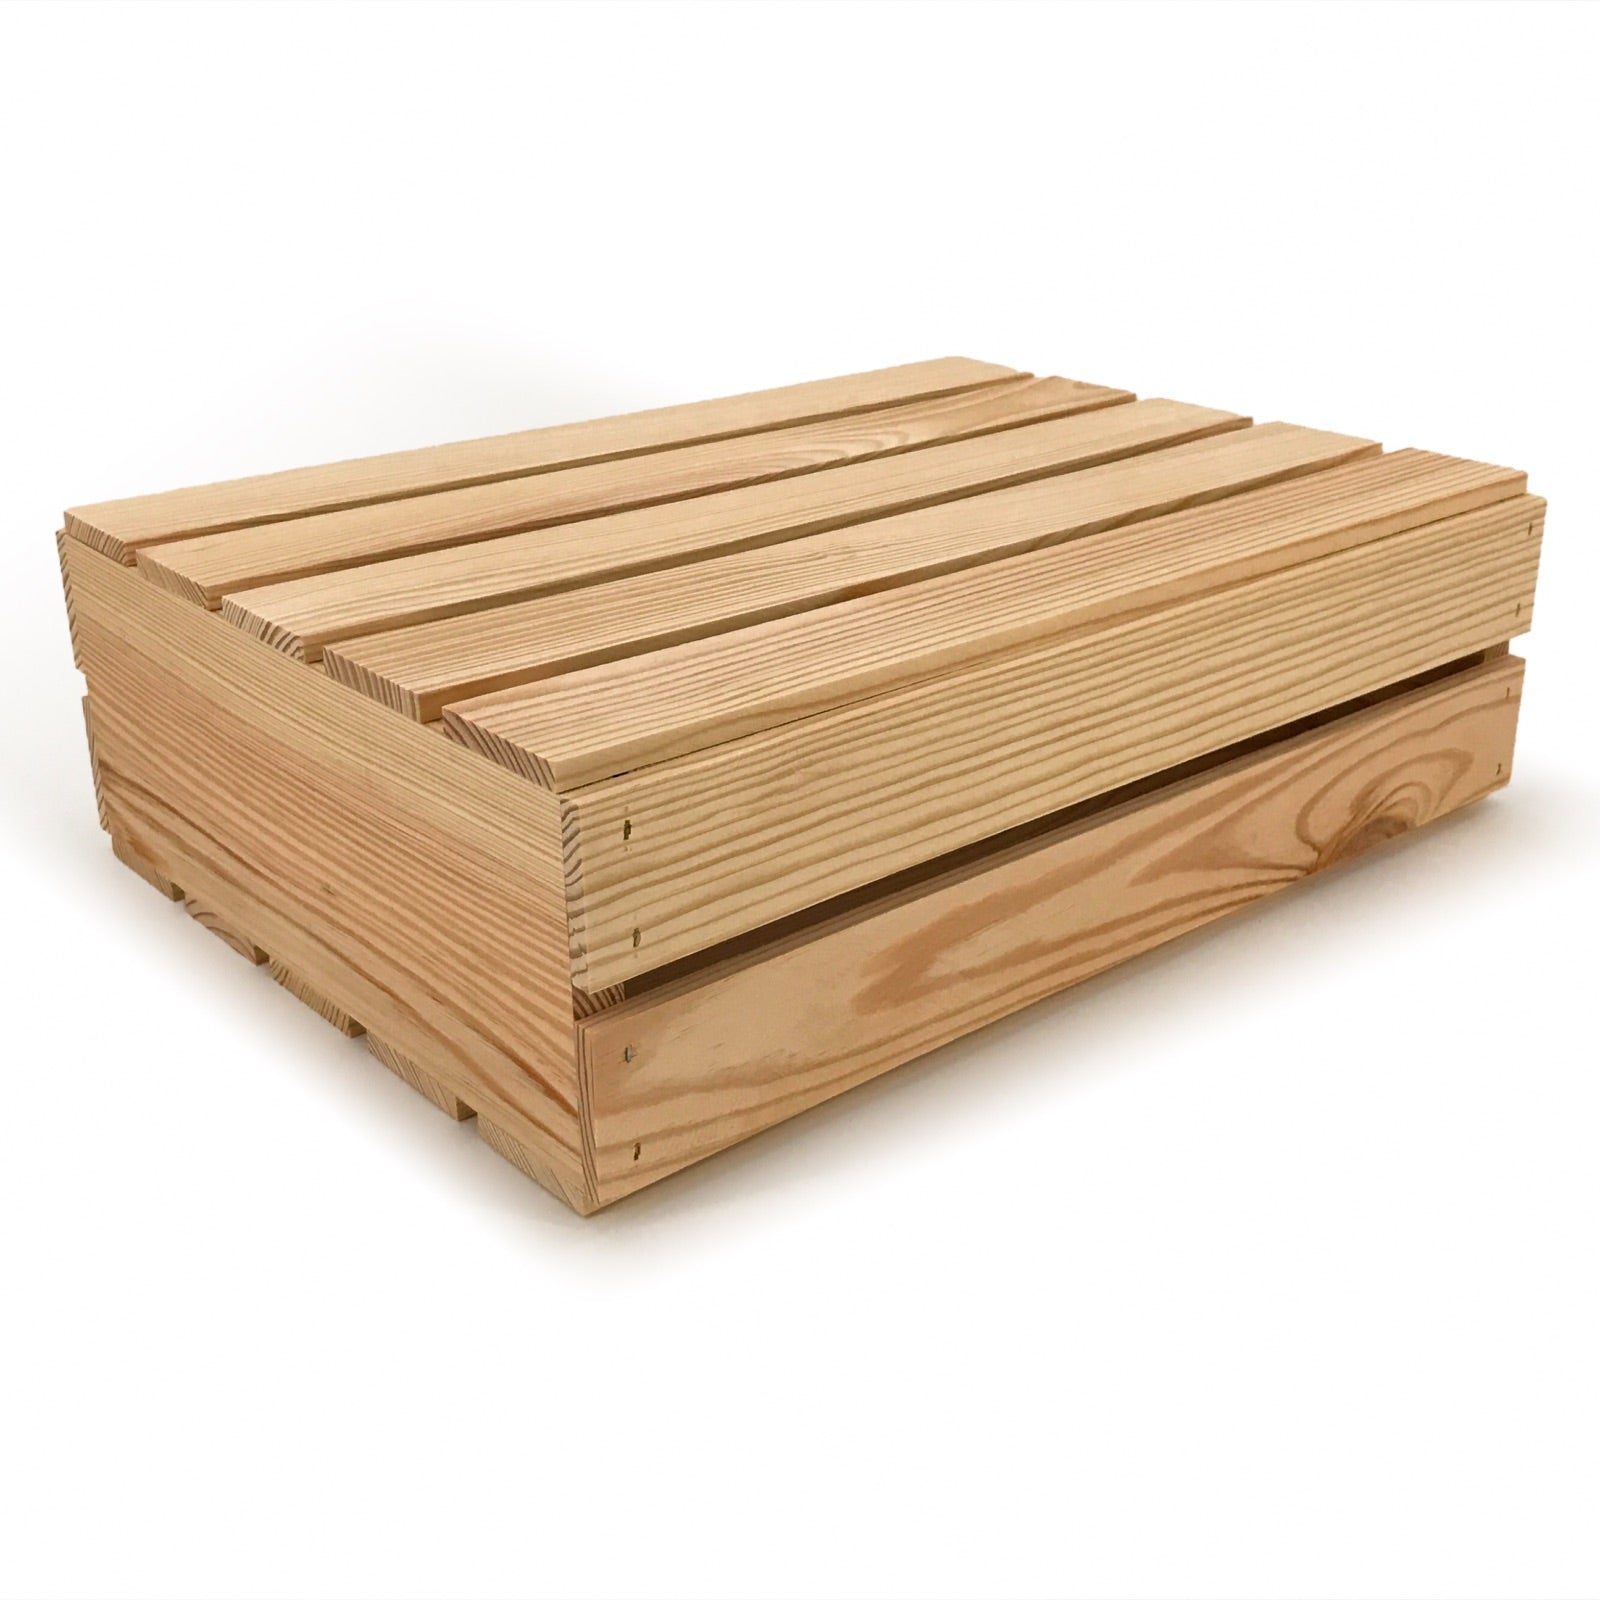 Small wooden crate with lid 18x14x5.25